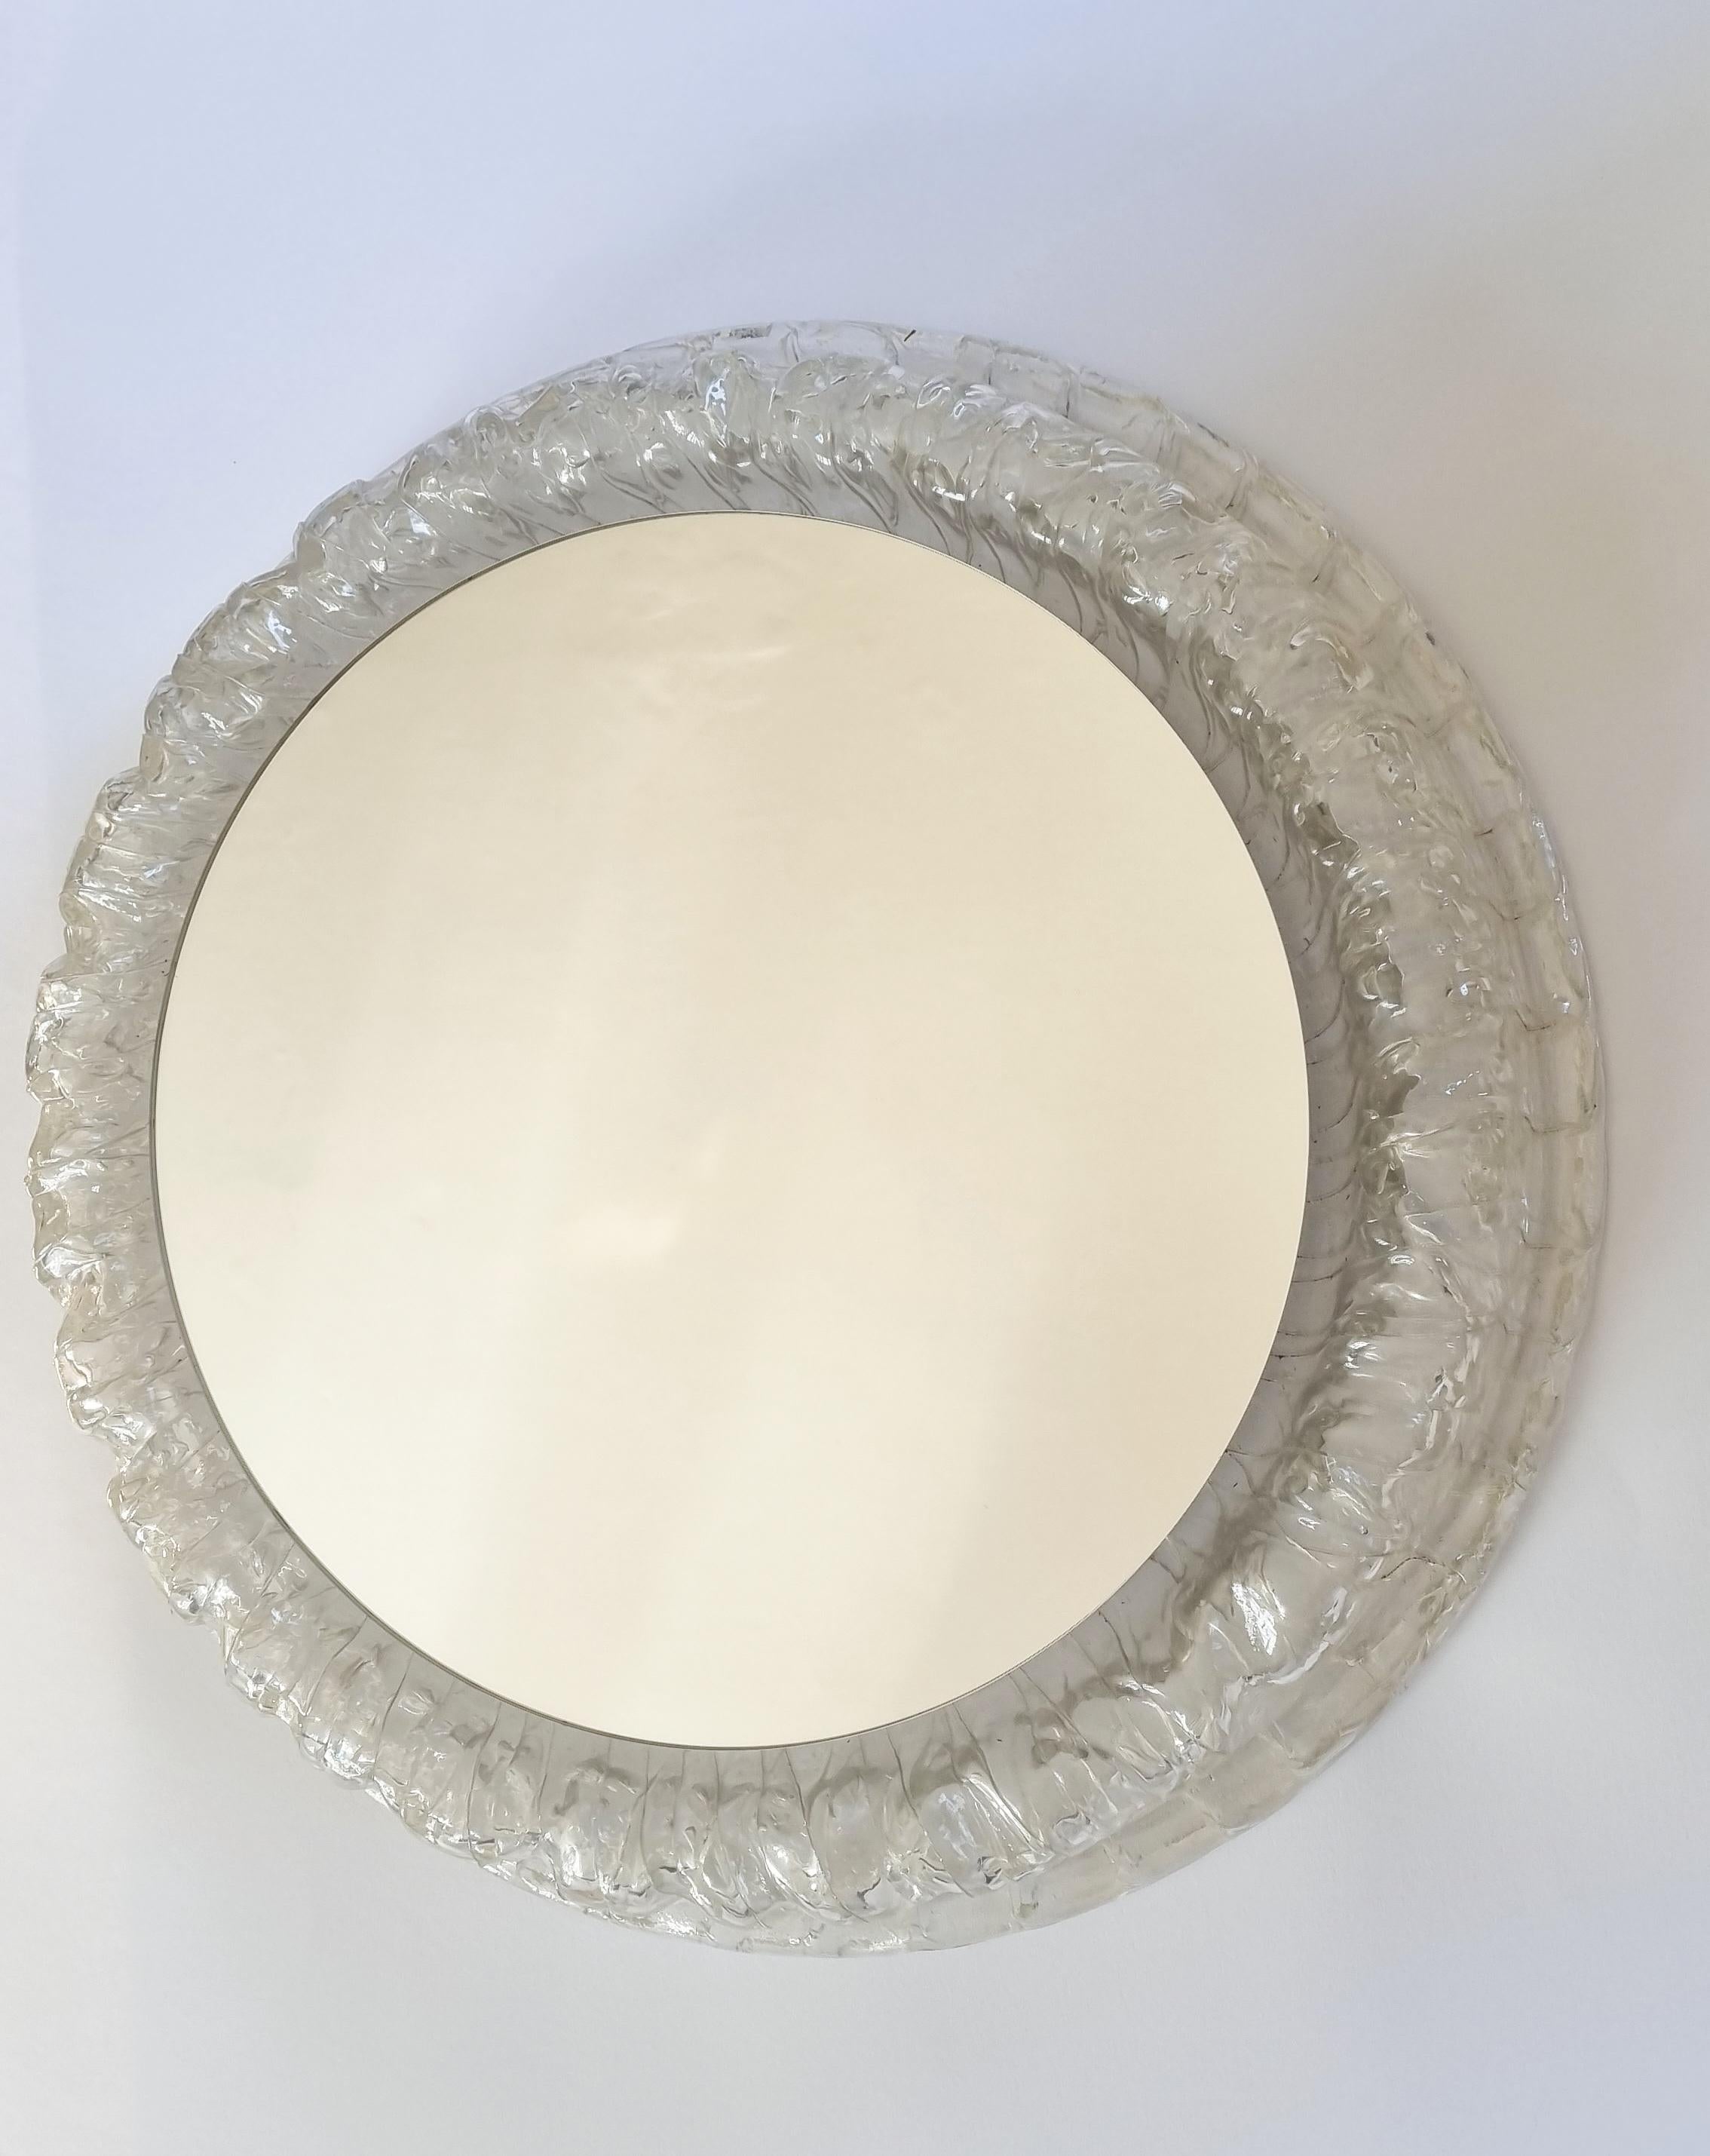 Midcentury Rare Wall Mirror Hillebrand, Germany, 1970s For Sale 3